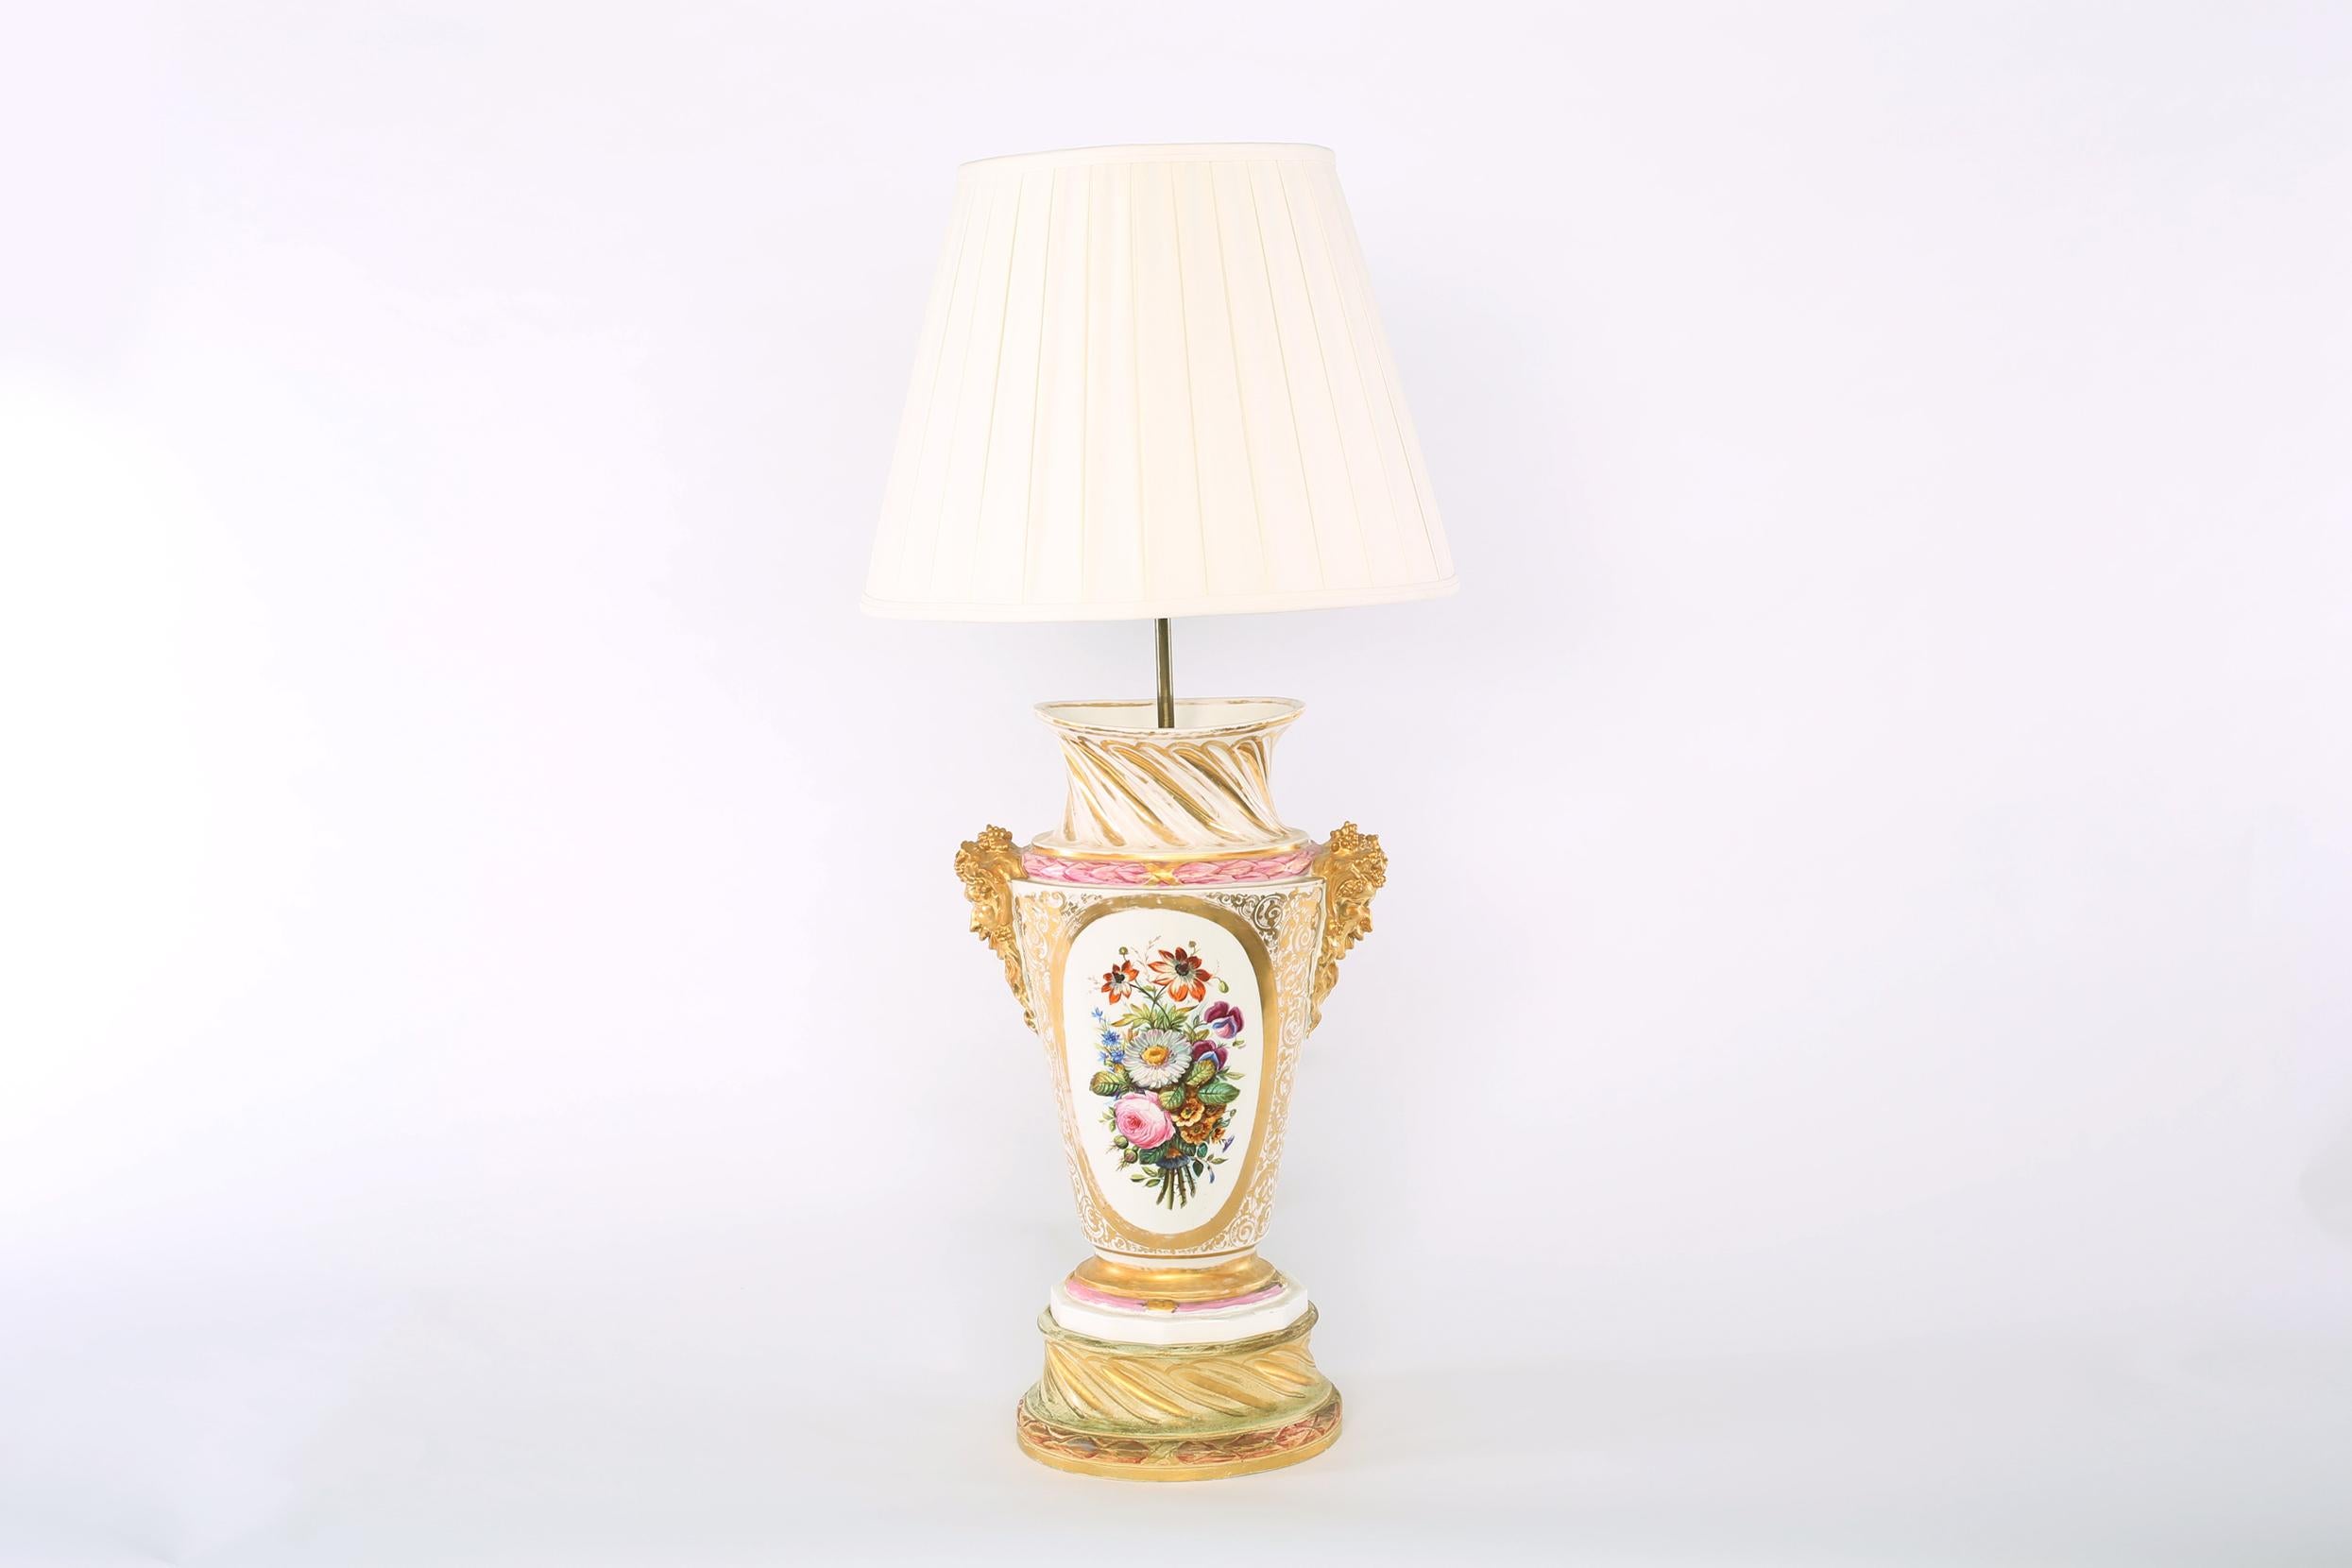 Large pair gilt Porcelain urn shape with exterior floral design details table / task lamps. Each lamp is in good working condition. Minor wear appropriate with age / use. Each lamp stand about 38.5 inches high x 18 inches wide. Each one comes with a